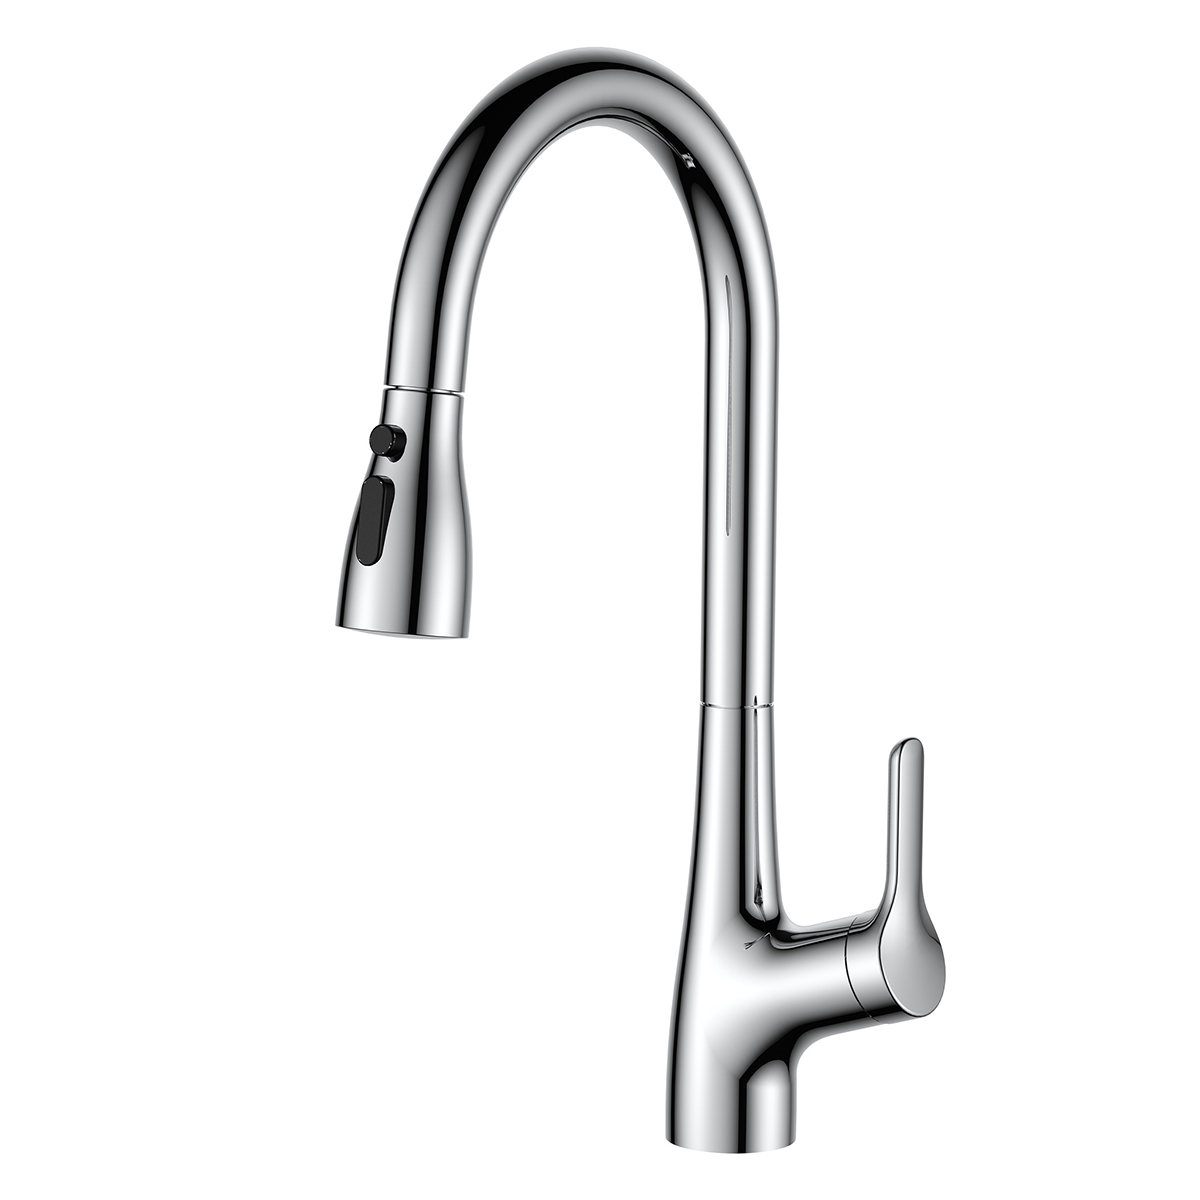 Aquacubic cUPC Modern brand low lead Kitchen Faucet with Pull Down Sprayer AF3052-5